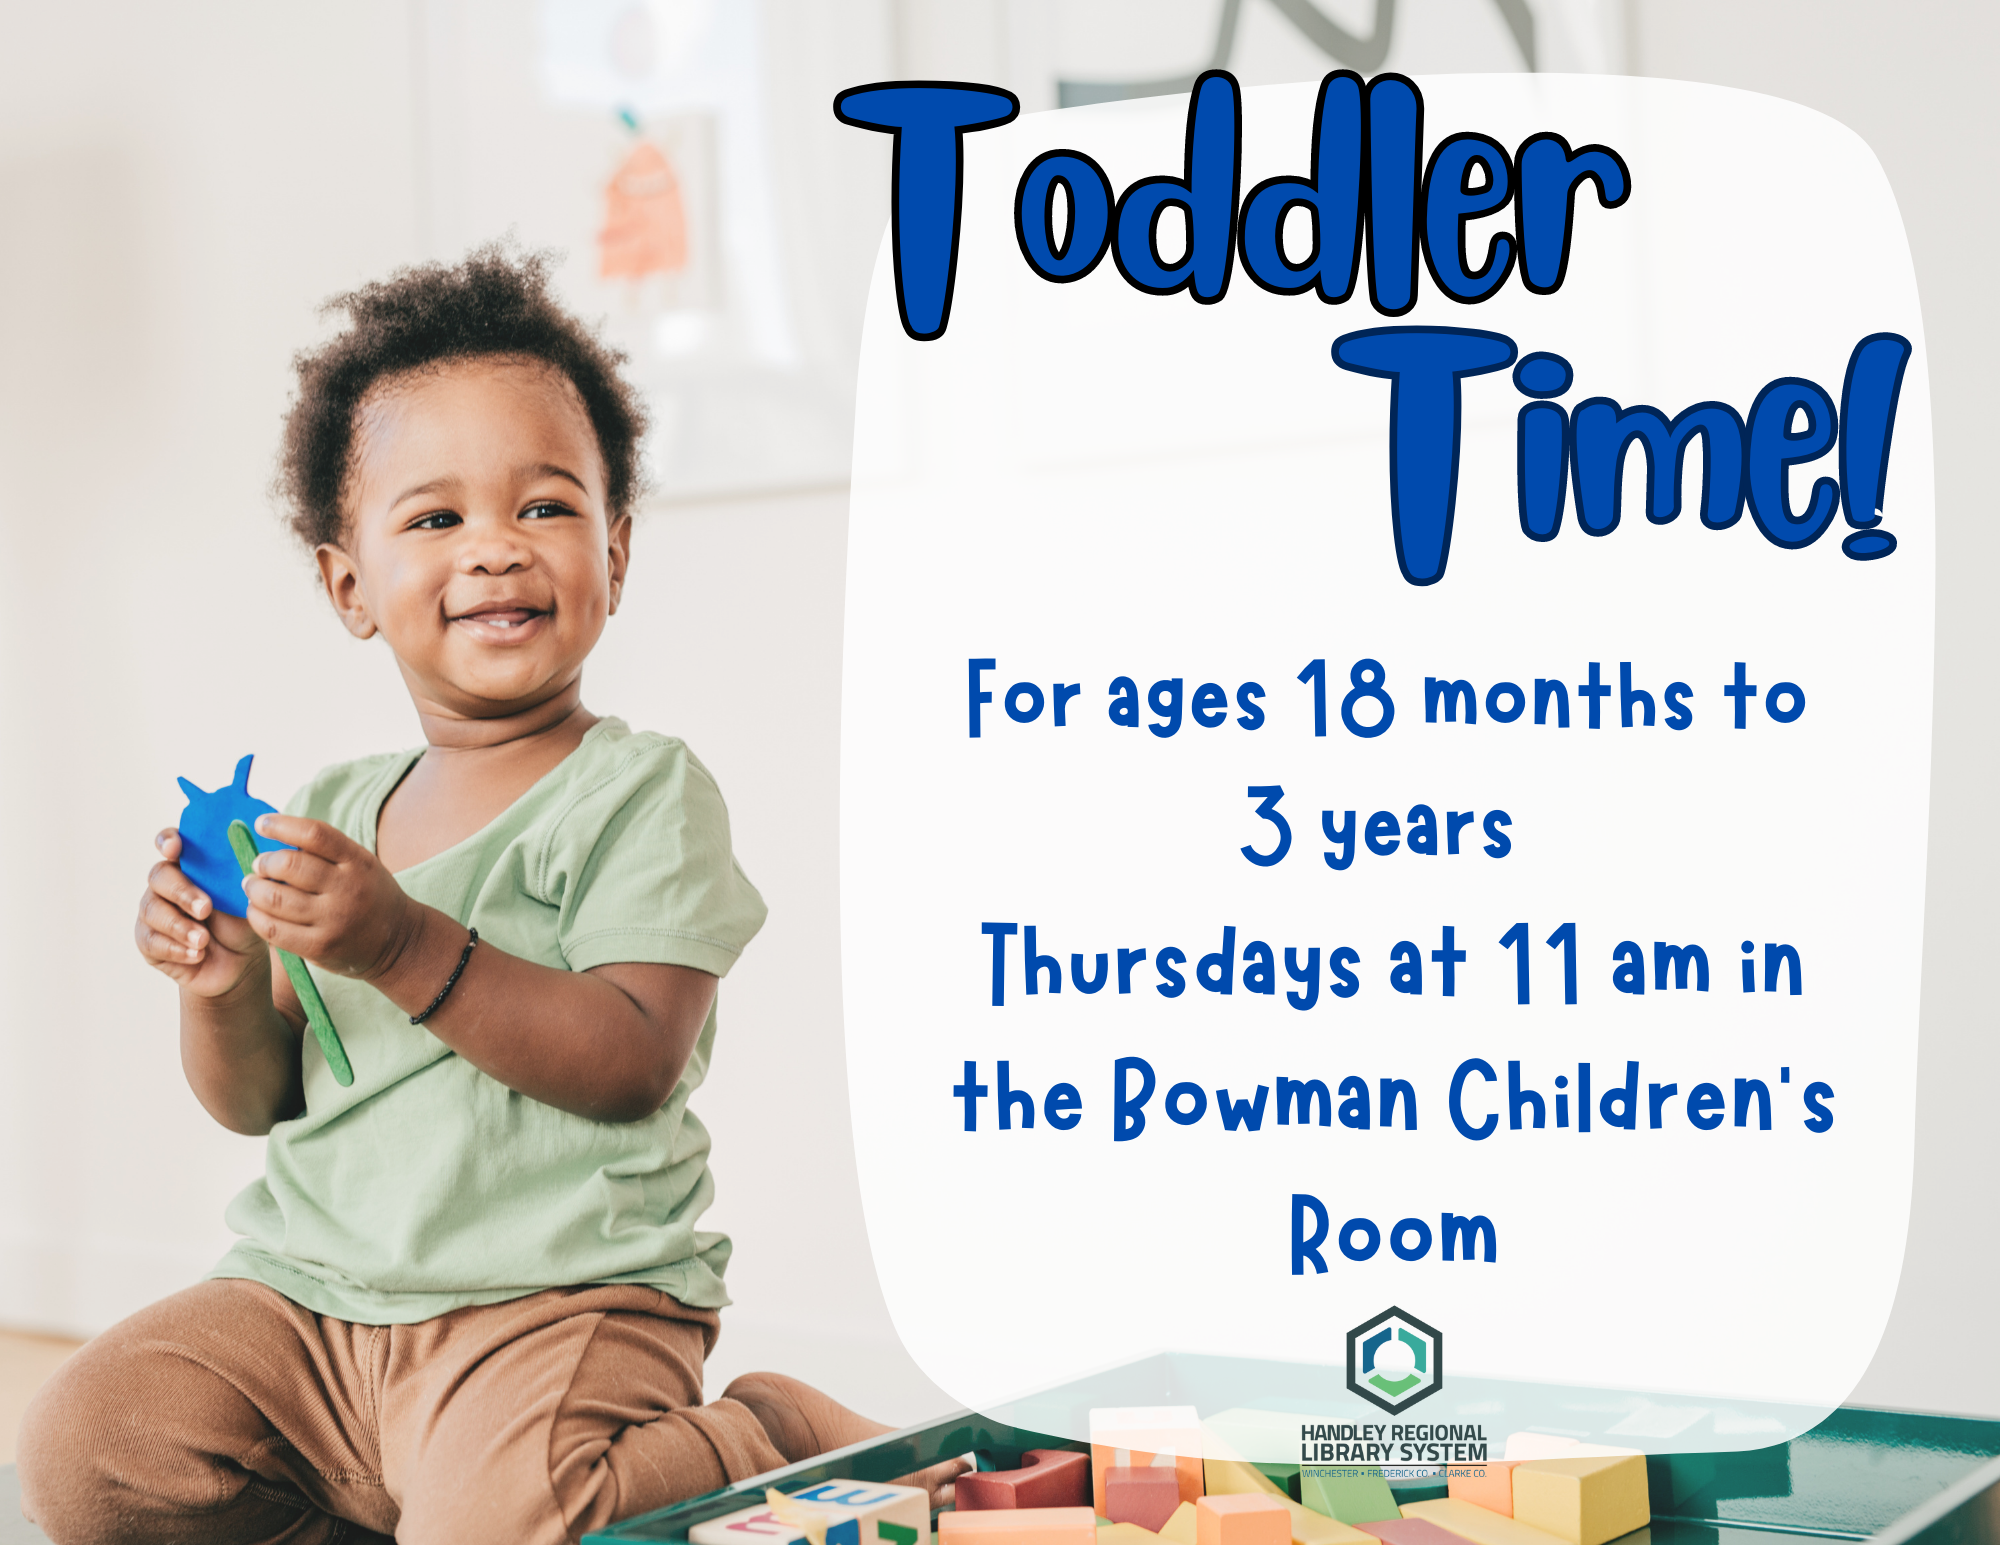 Toddler Time promotional poster with a smiling toddler holding a blue toy